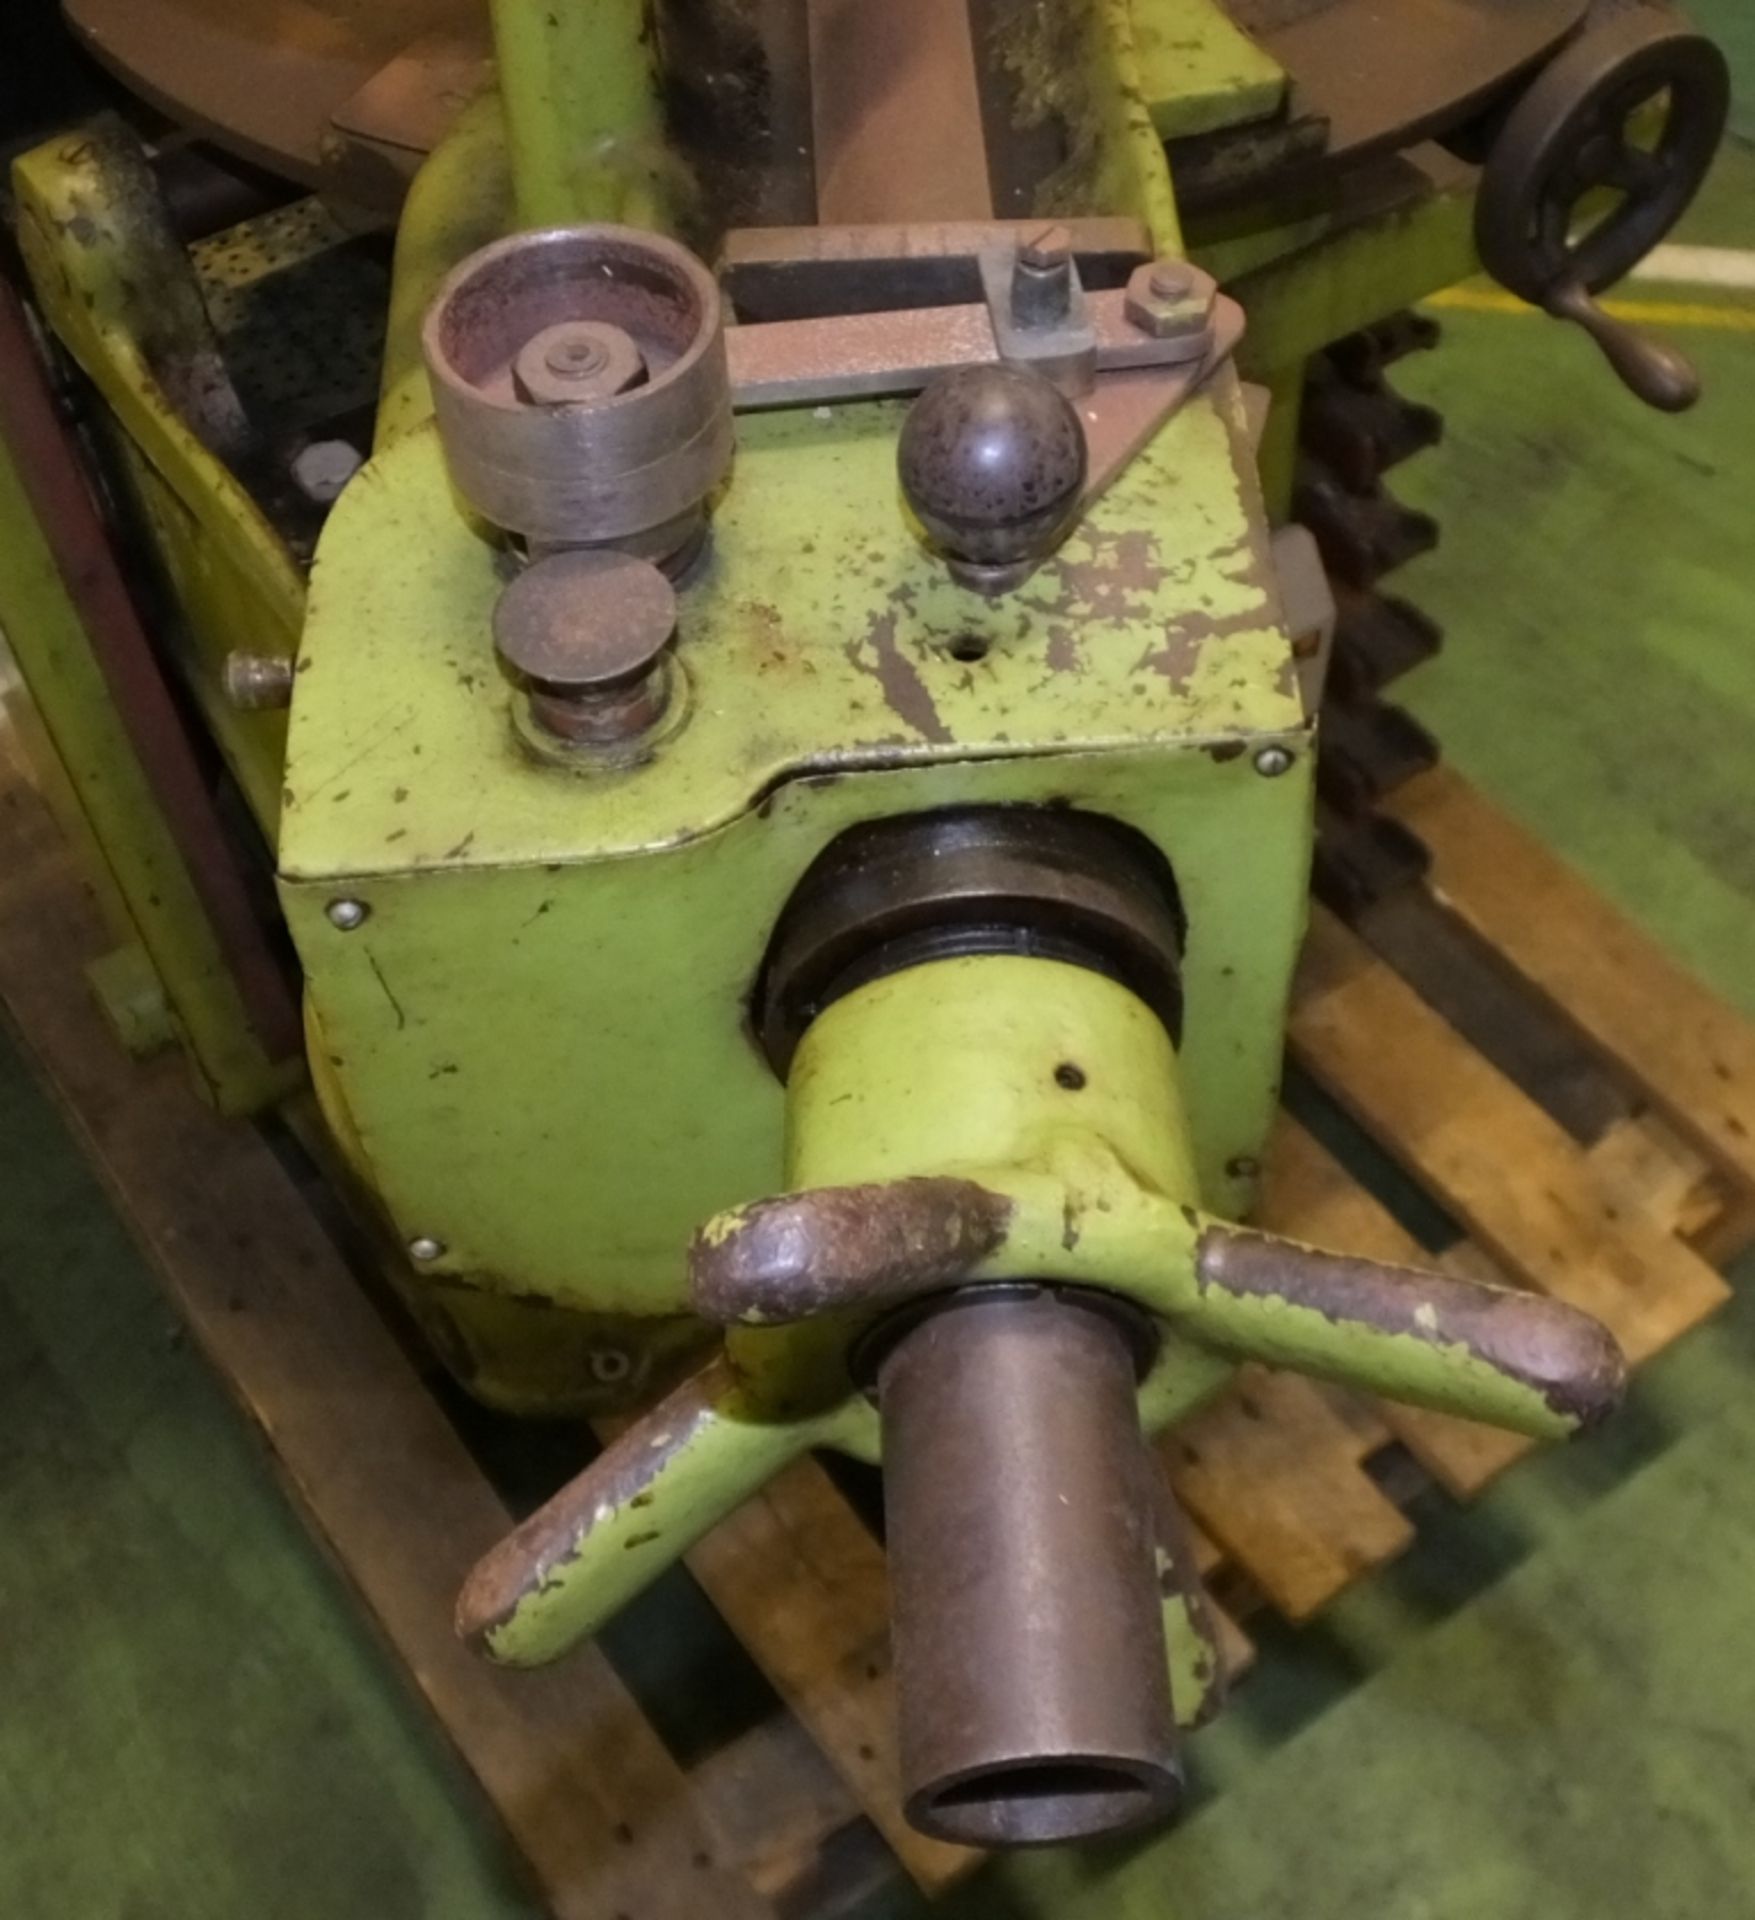 Herbert Hunt & Sons Drill Sharpening Machine - £5 Loading Charge Applied to this lot - Image 6 of 6